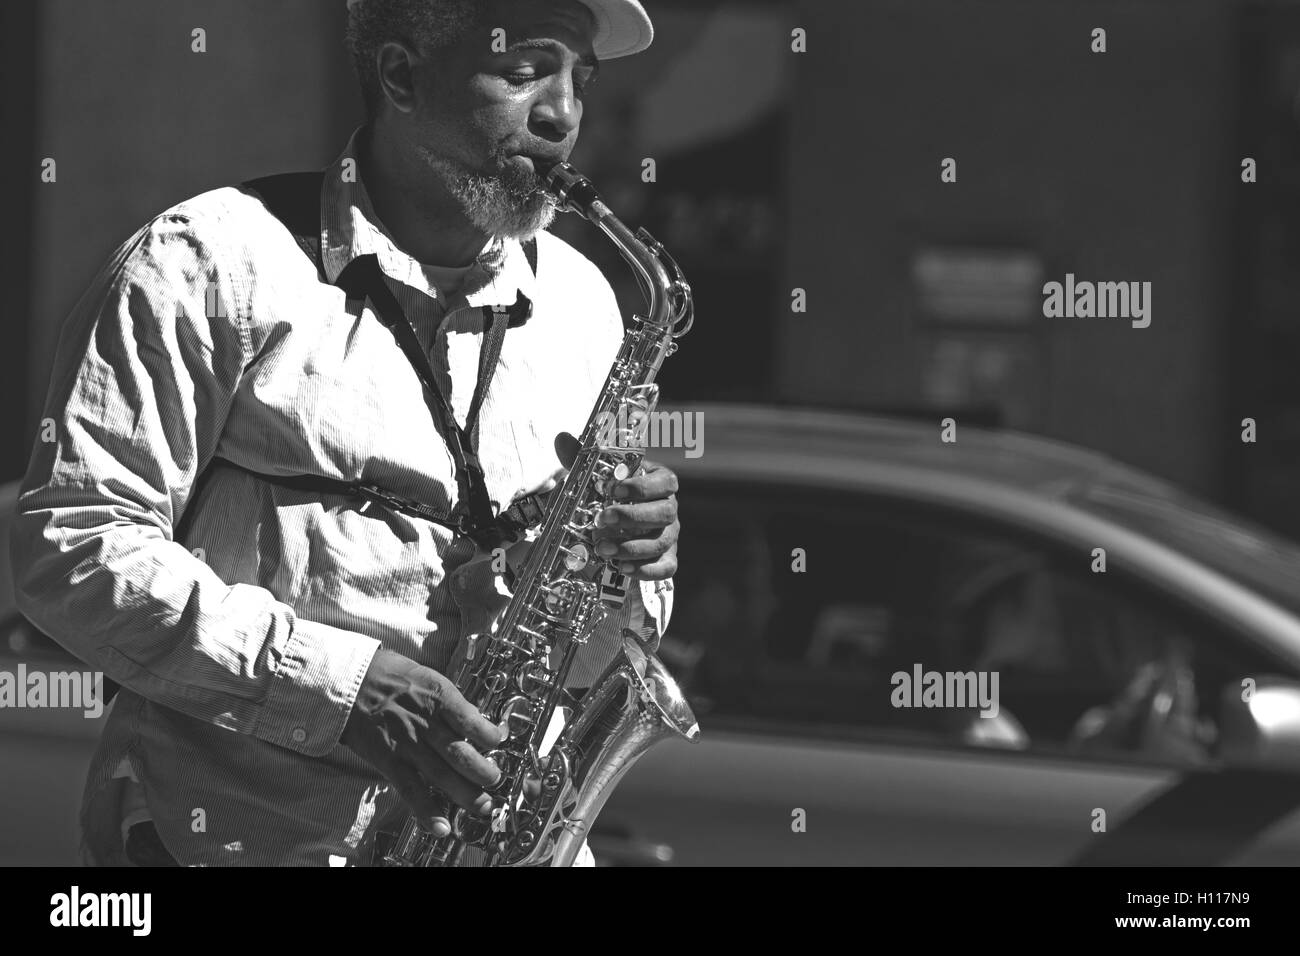 Street performer playing the saxophone Stock Photo